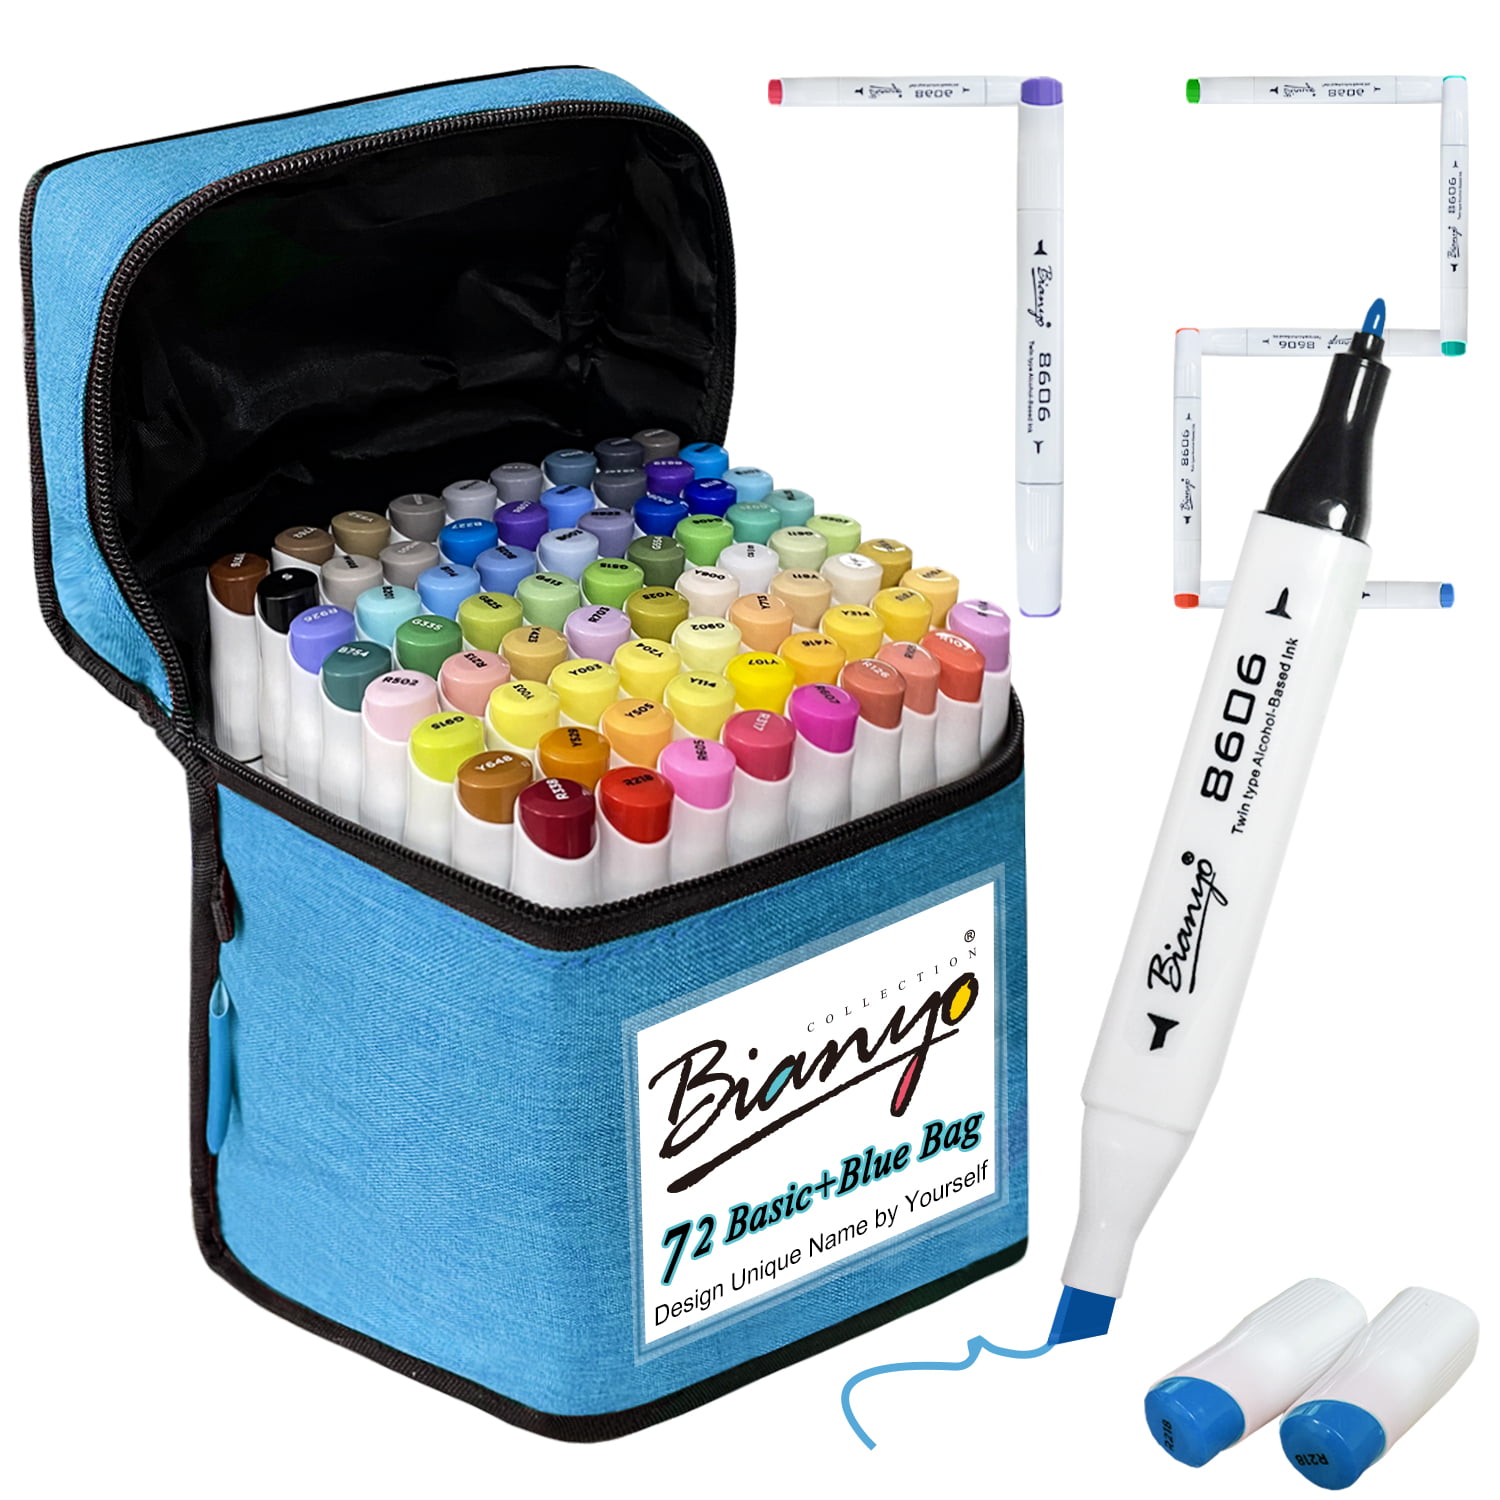 Bianyo Professional Series Alcohol-Based Dual Tip Brush Markers, Set of 72